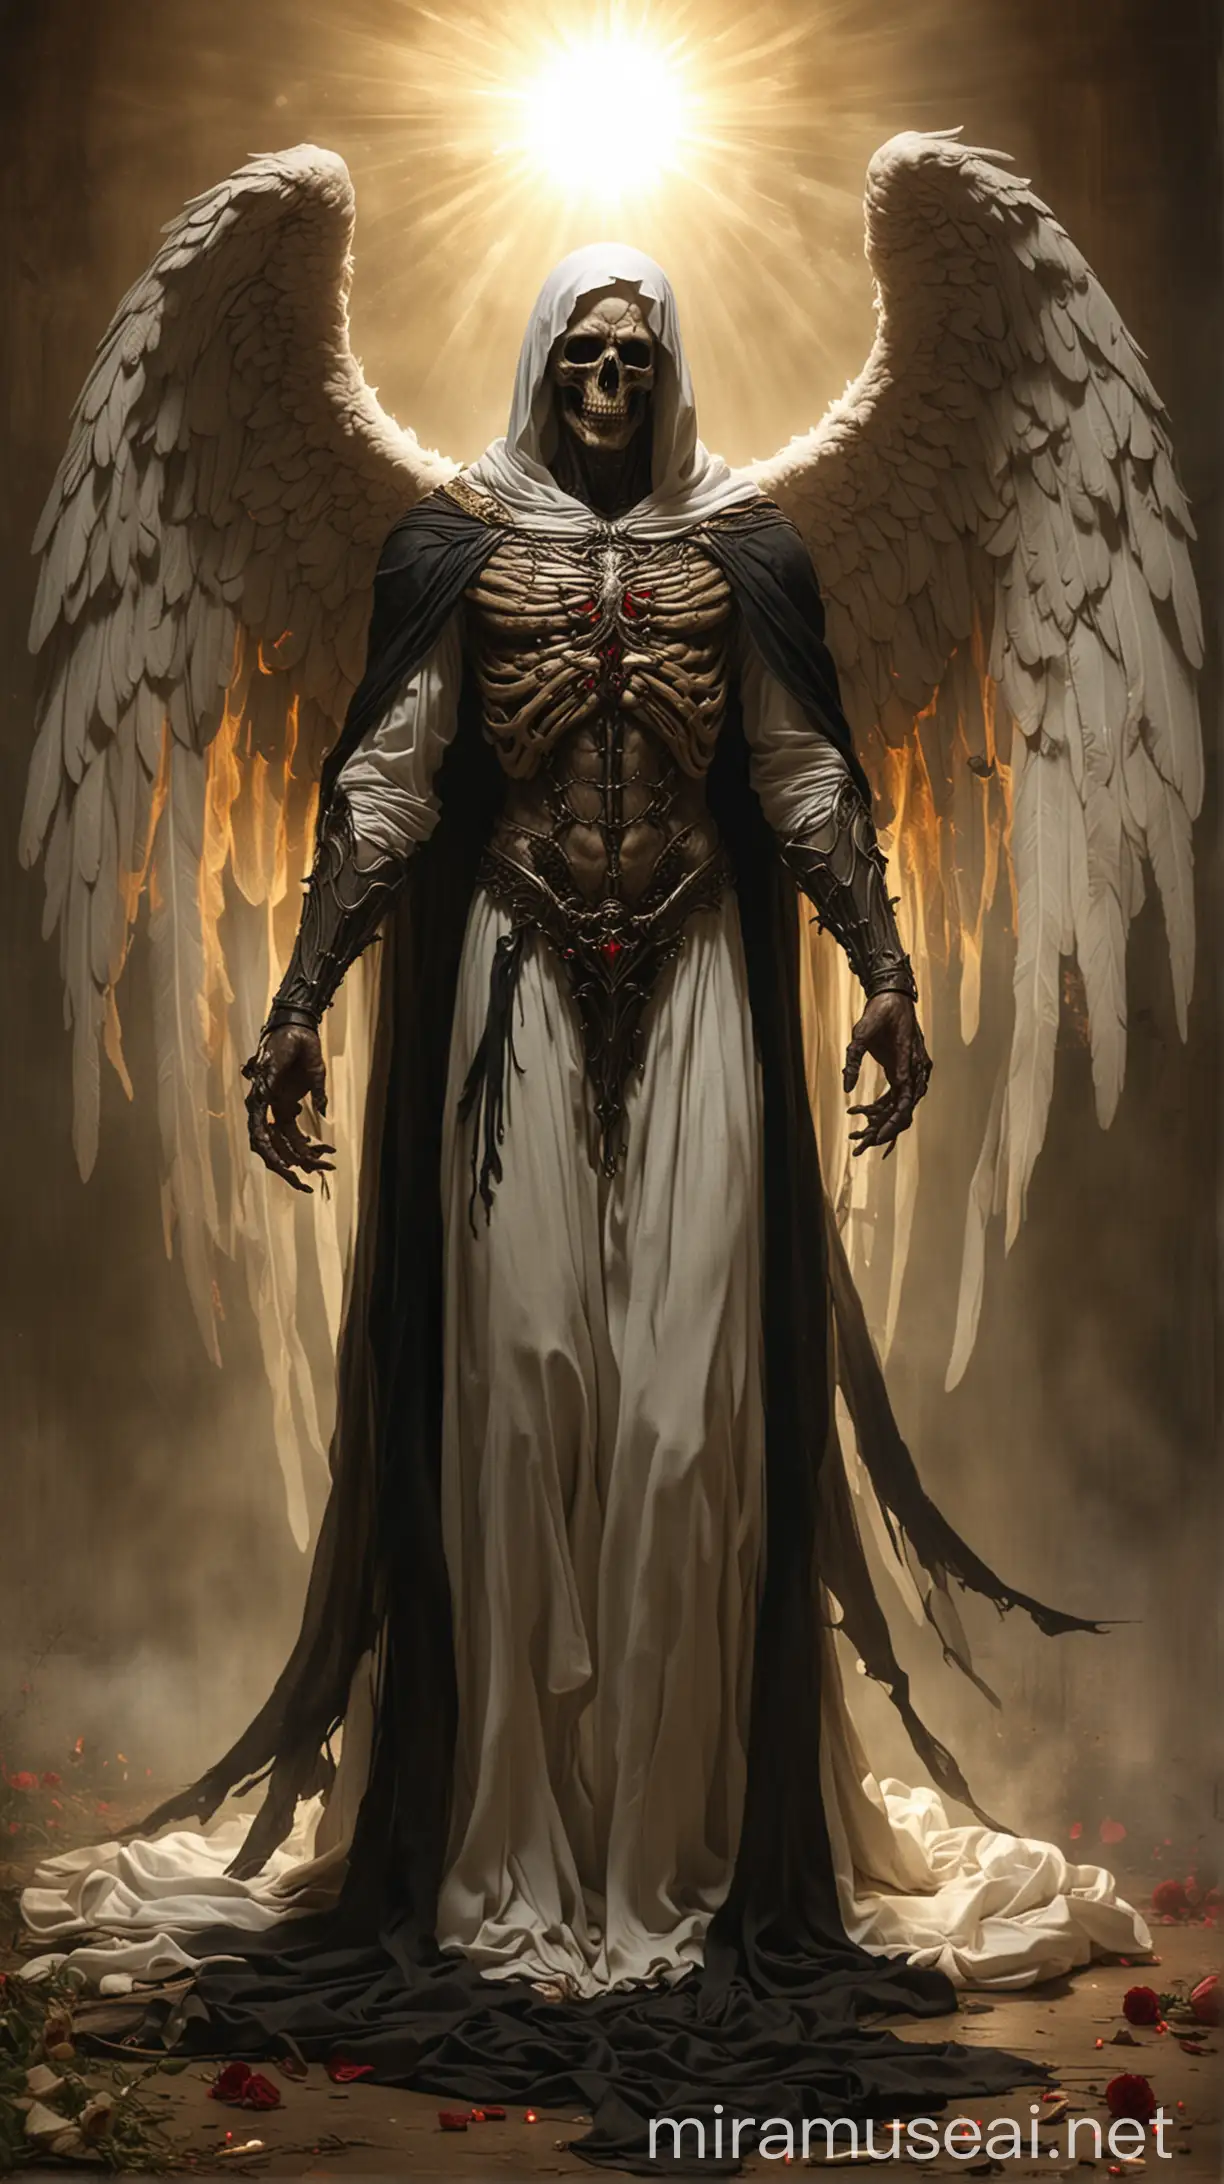 Malak al-Mawt (Azrael) Taking a Soul:  Description: The Angel of Death, Azrael, gently taking the soul of a righteous man in a serene and peaceful setting, with a soft, glowing light surrounding the scene.